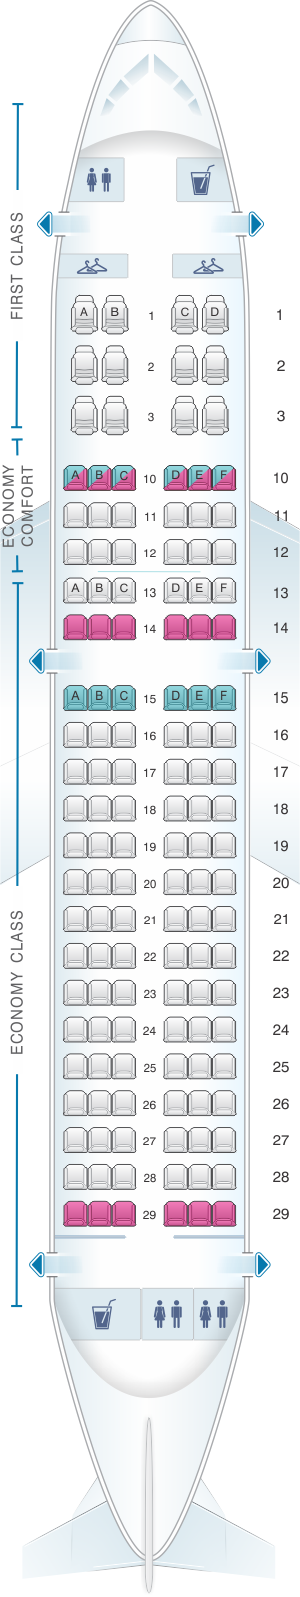 airbus a319 seating